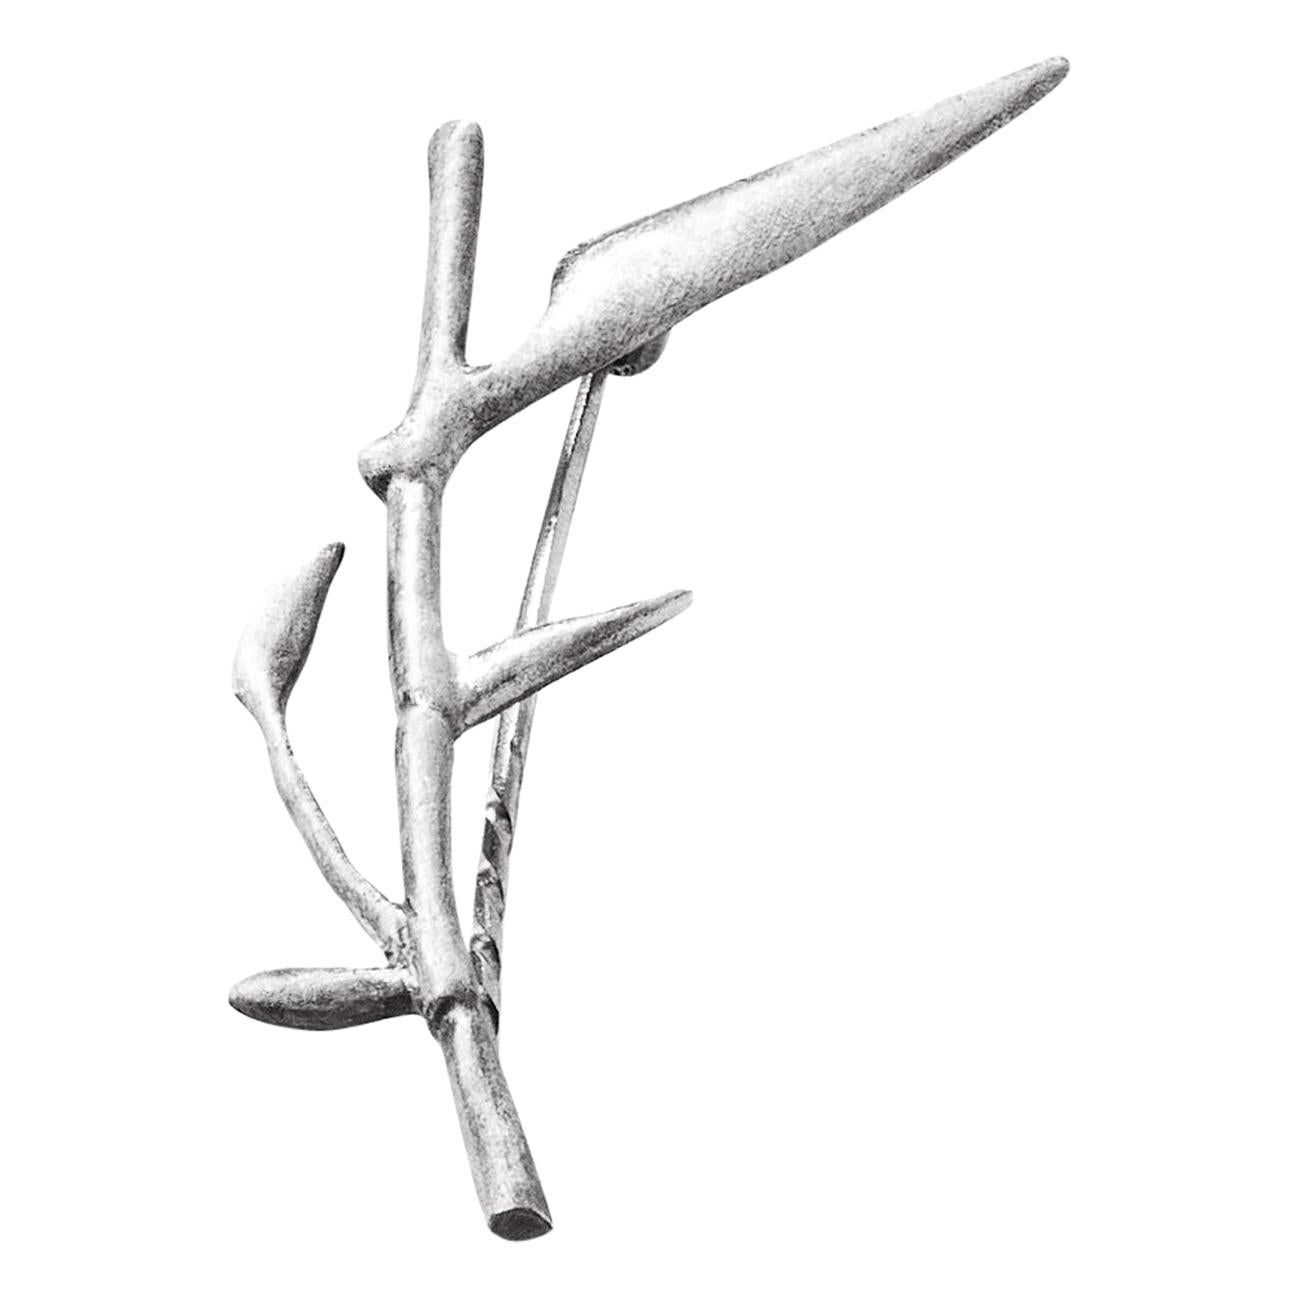 Bamboo Brooch in Silver N3 by the Artist